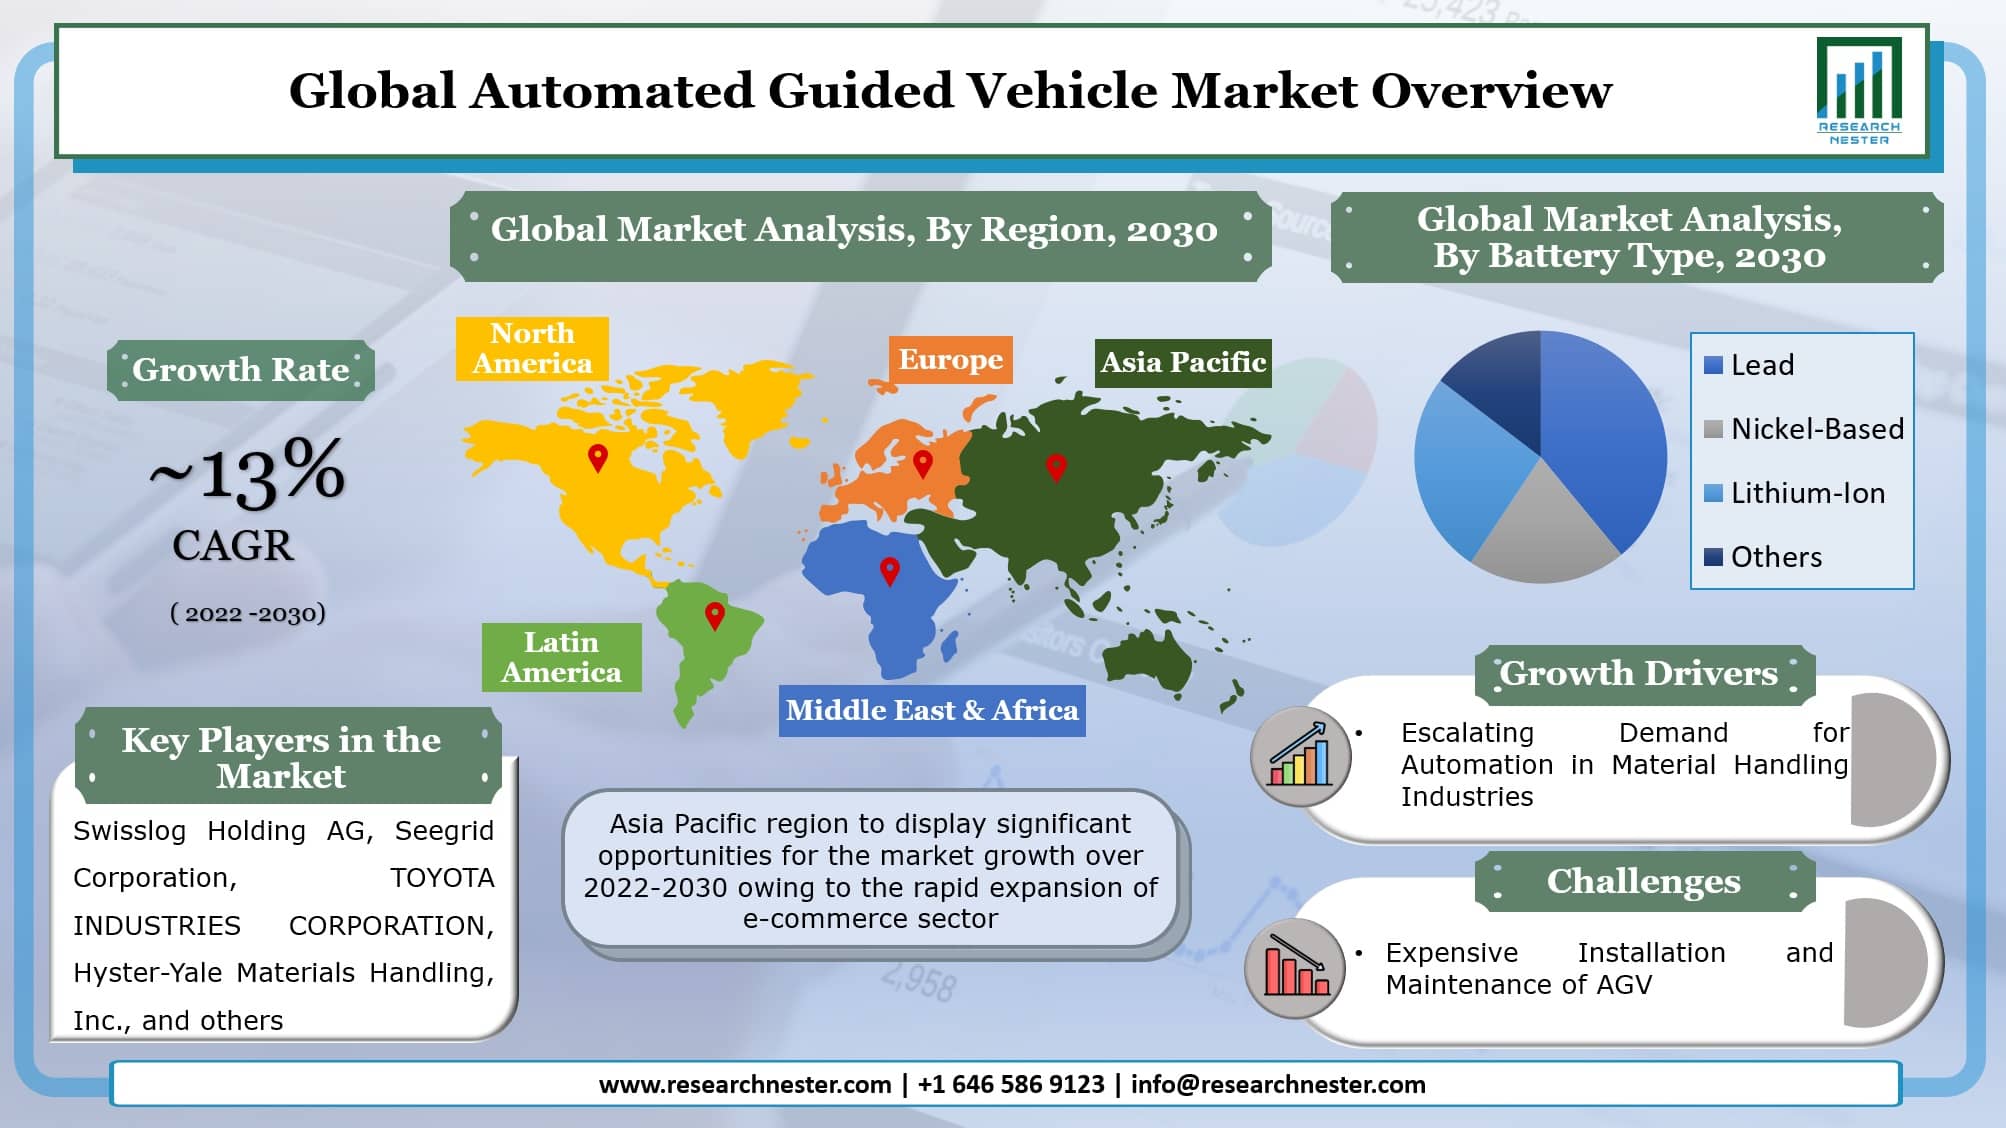 Global Automated Guided Vehicle (AGV) Market  overview